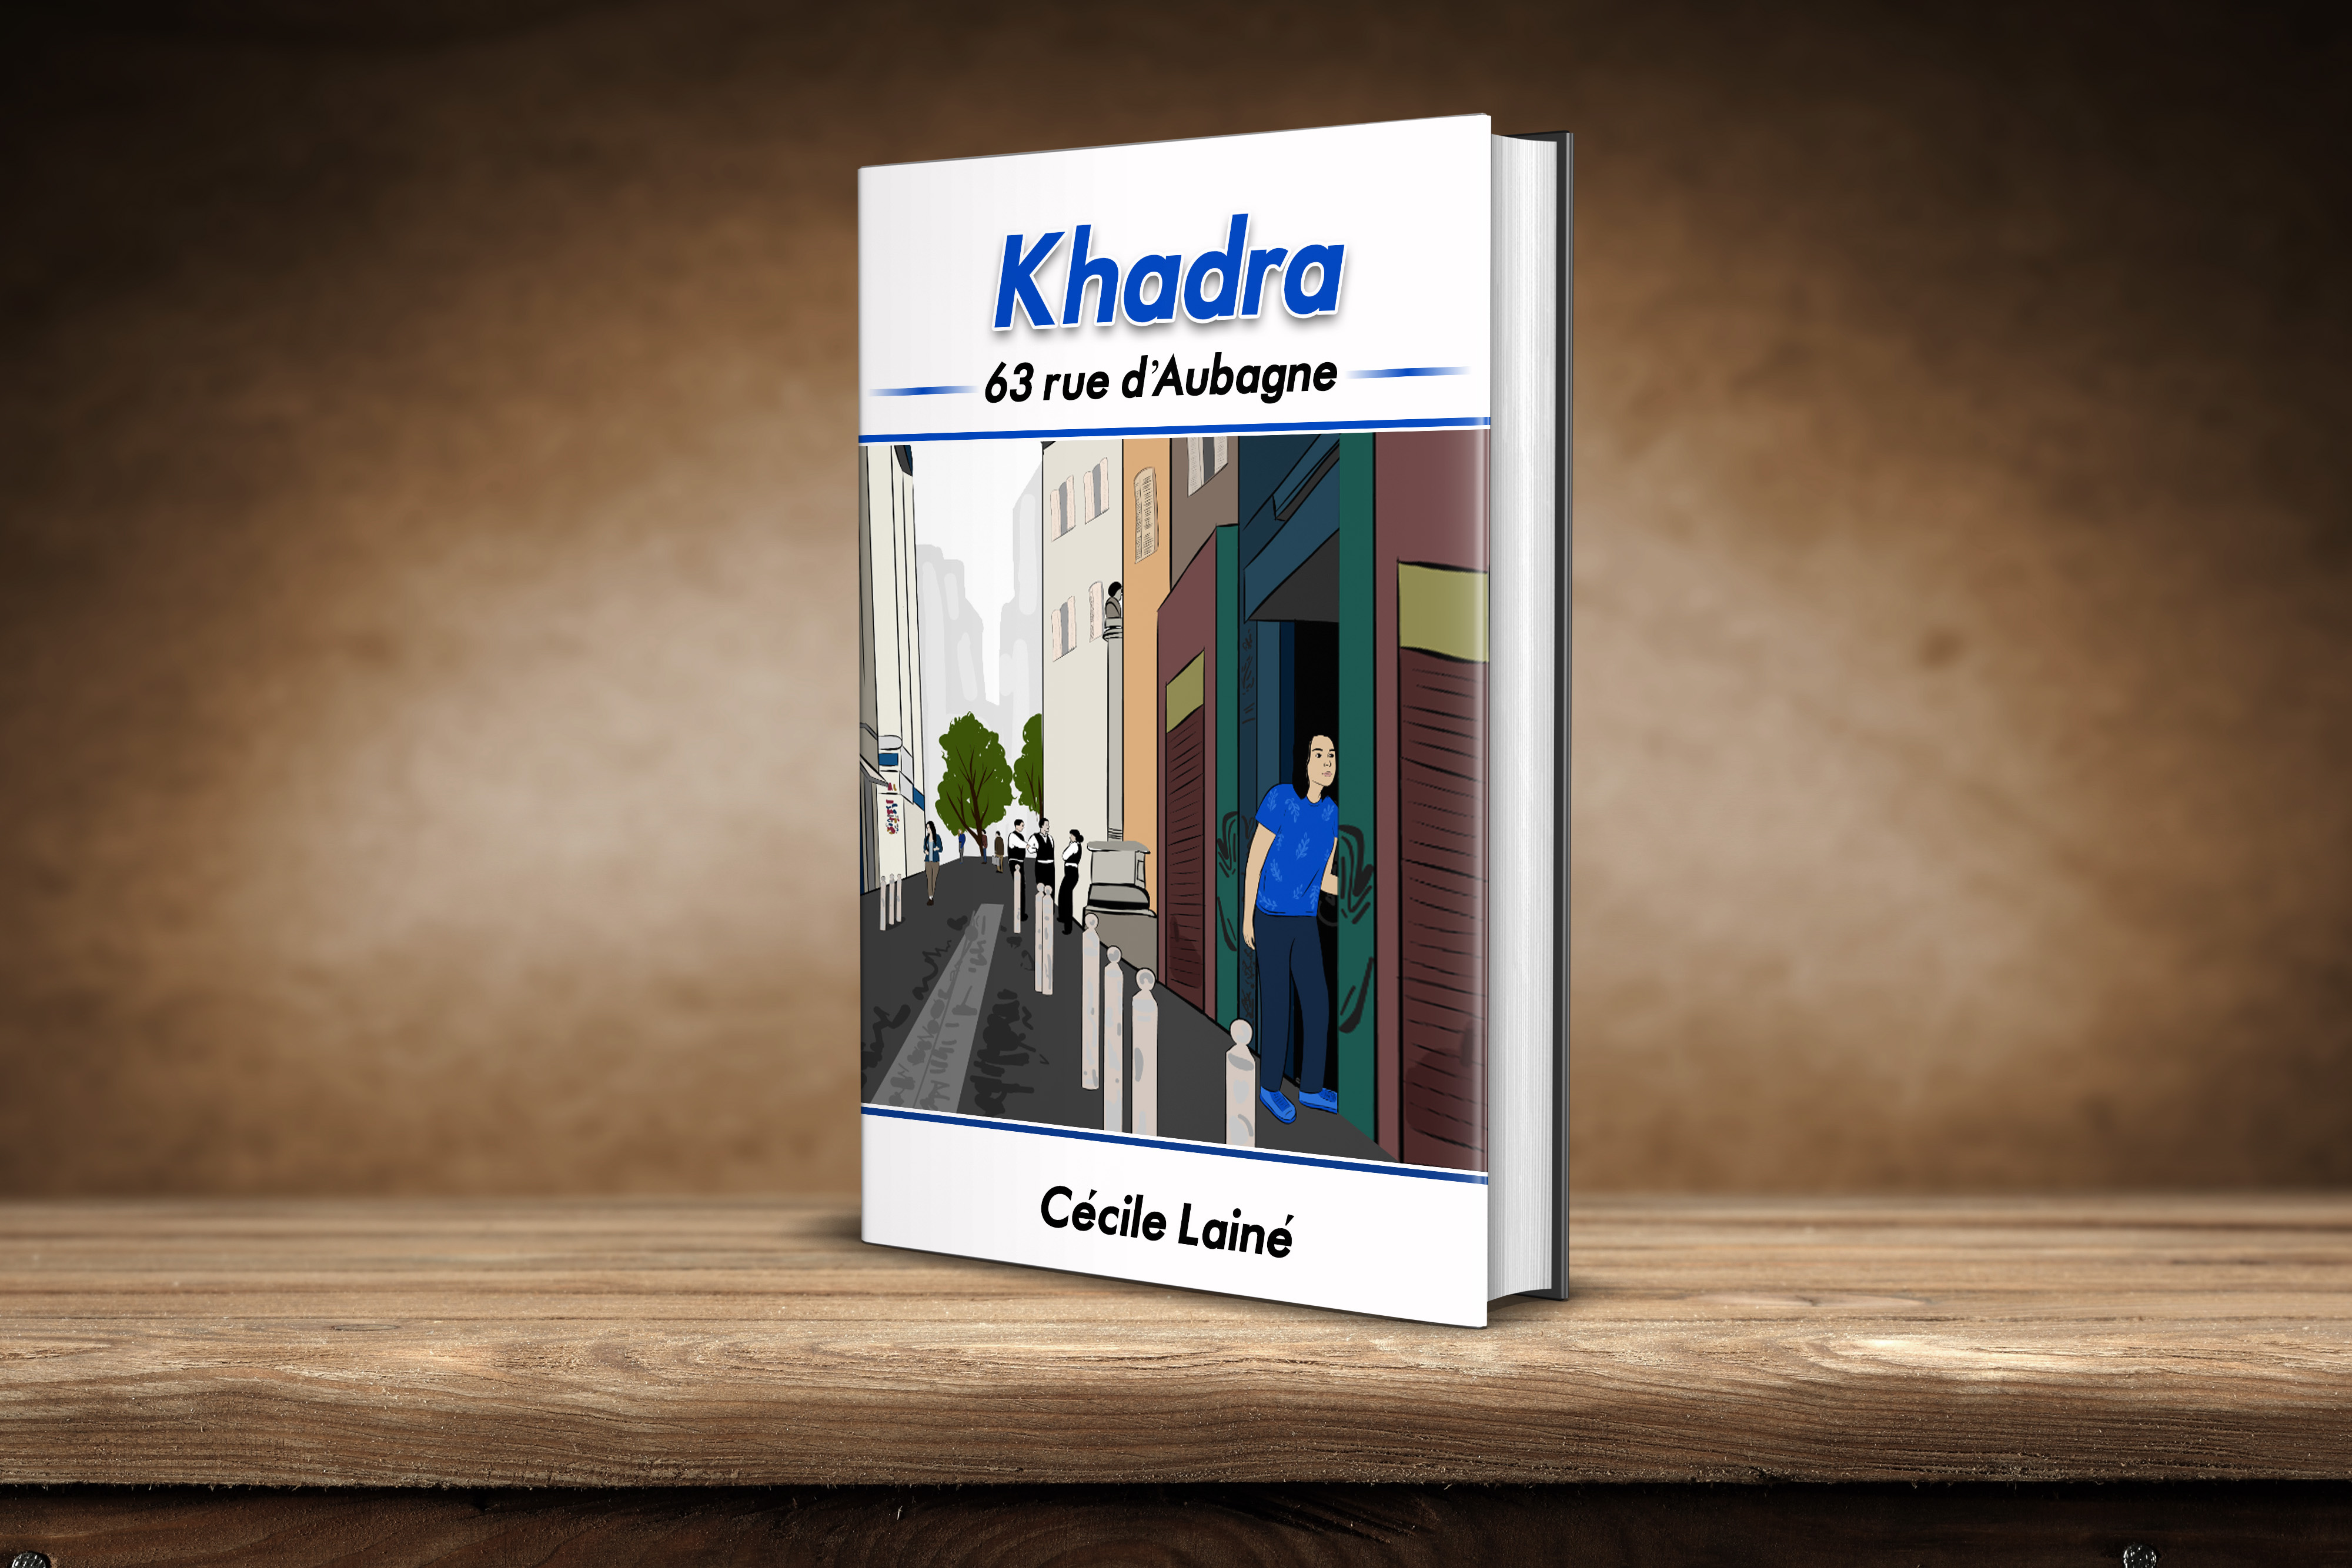 Introducing “Khadra”, the second installment of the “Alice” series